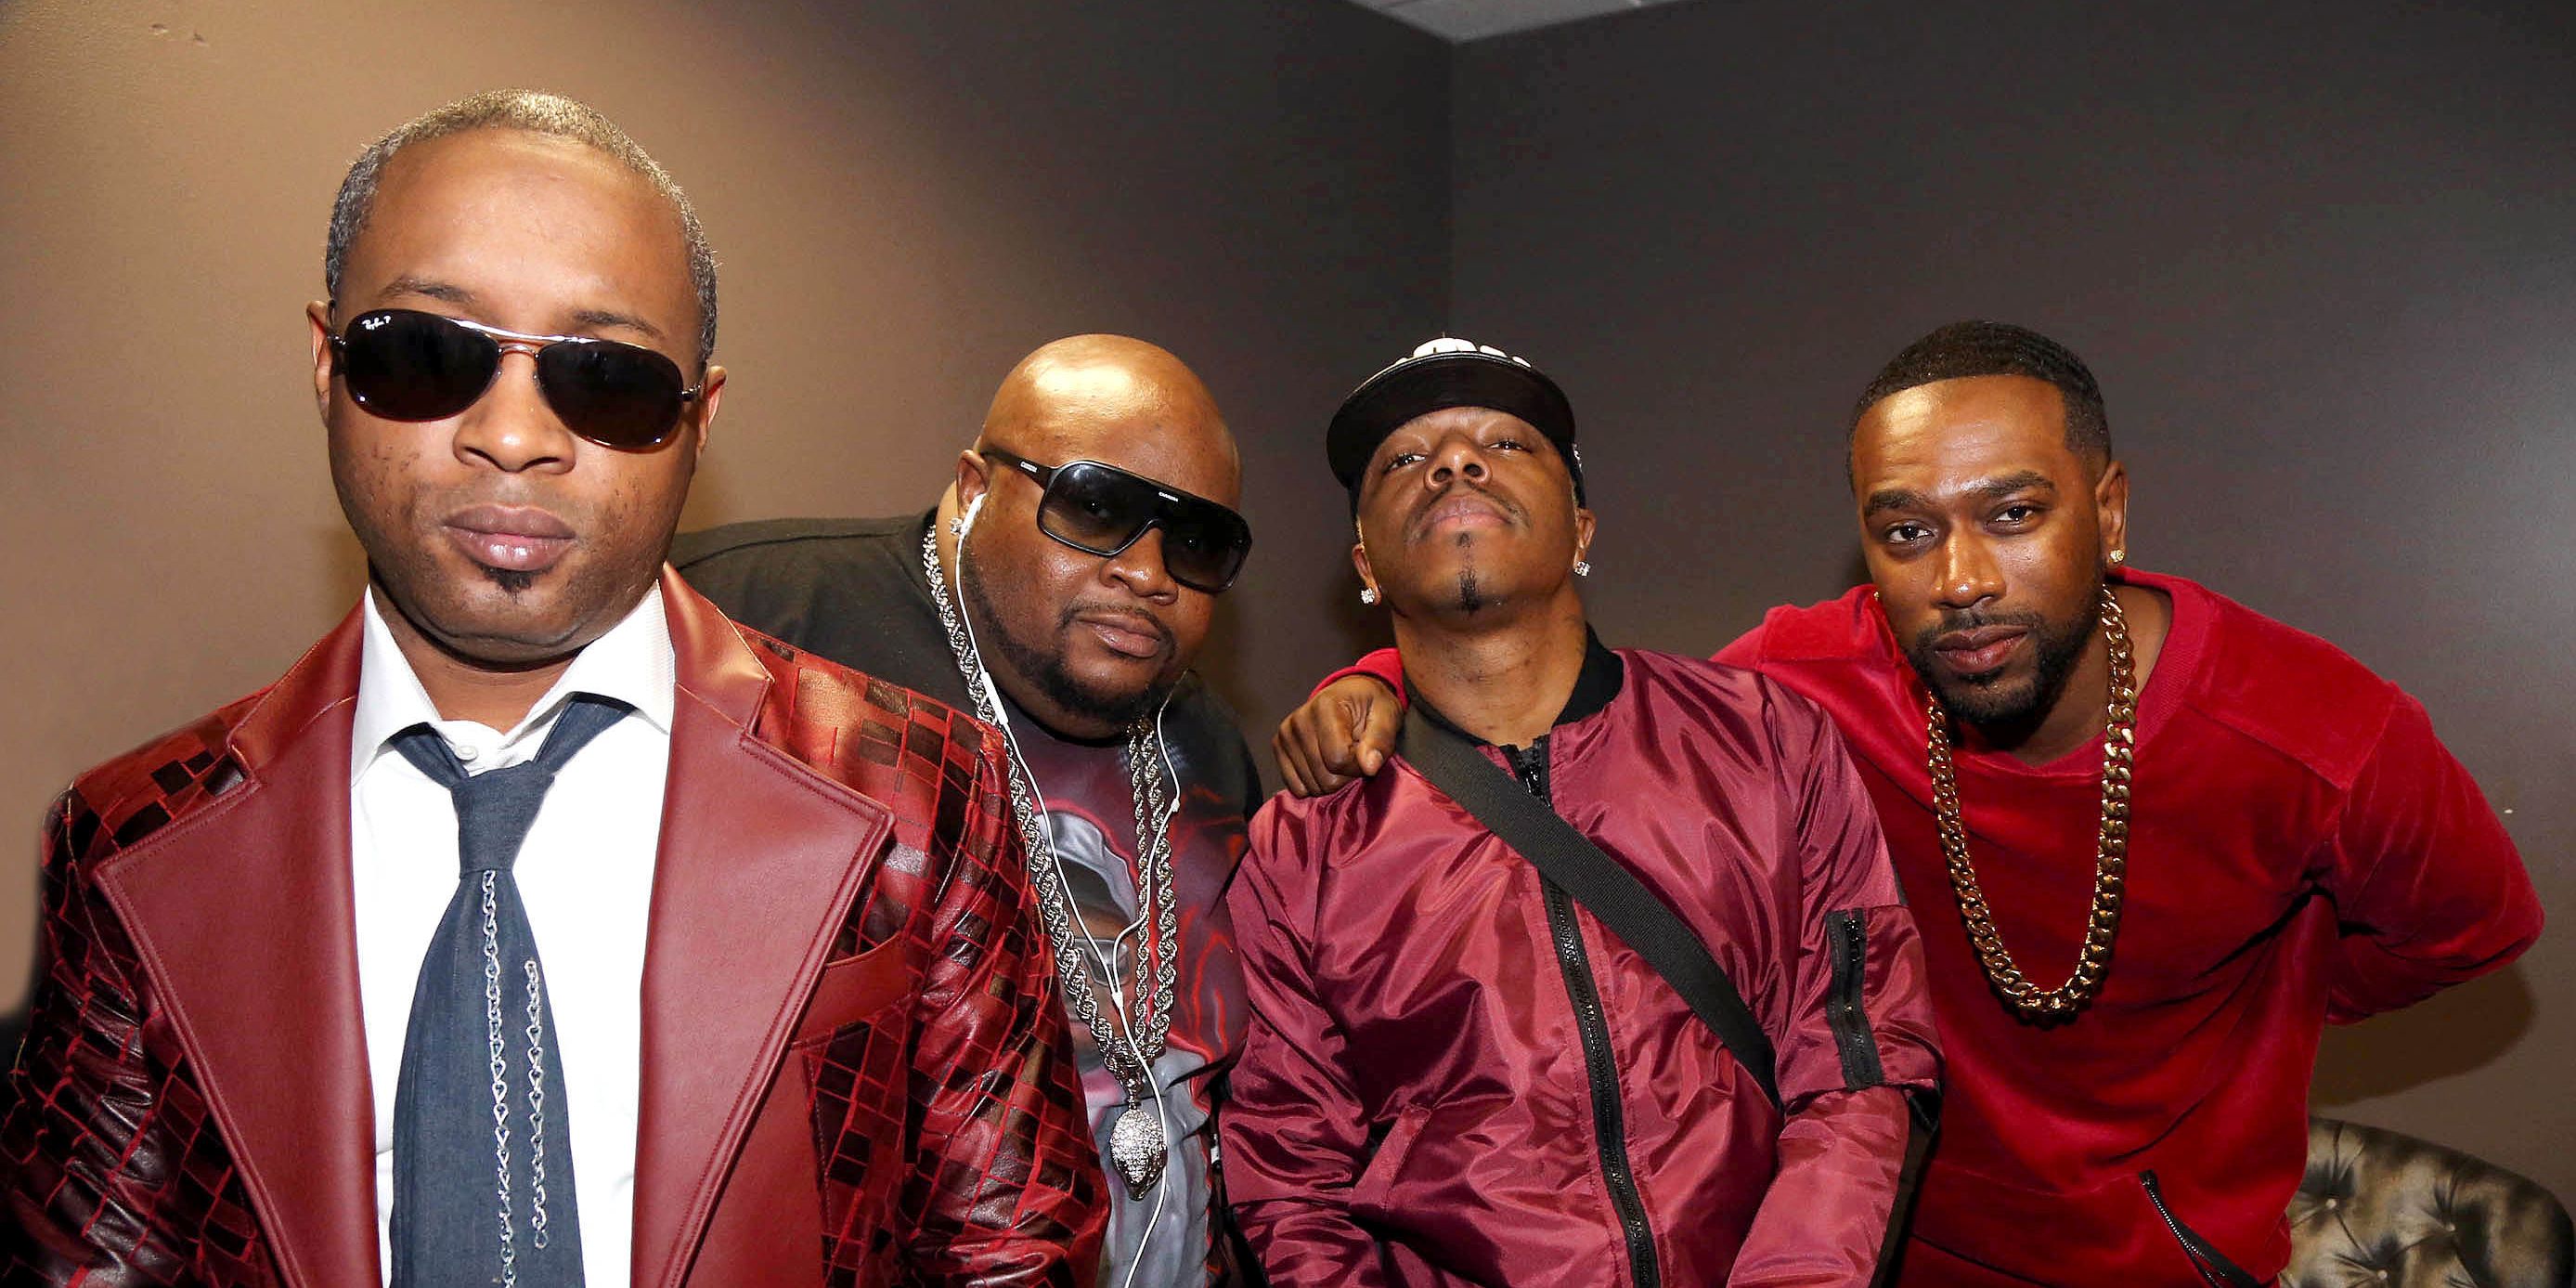 Dru Hill Drop 'Christmas in Baltimore' EP, Their First Project in 7 Years | HipHop-N-More